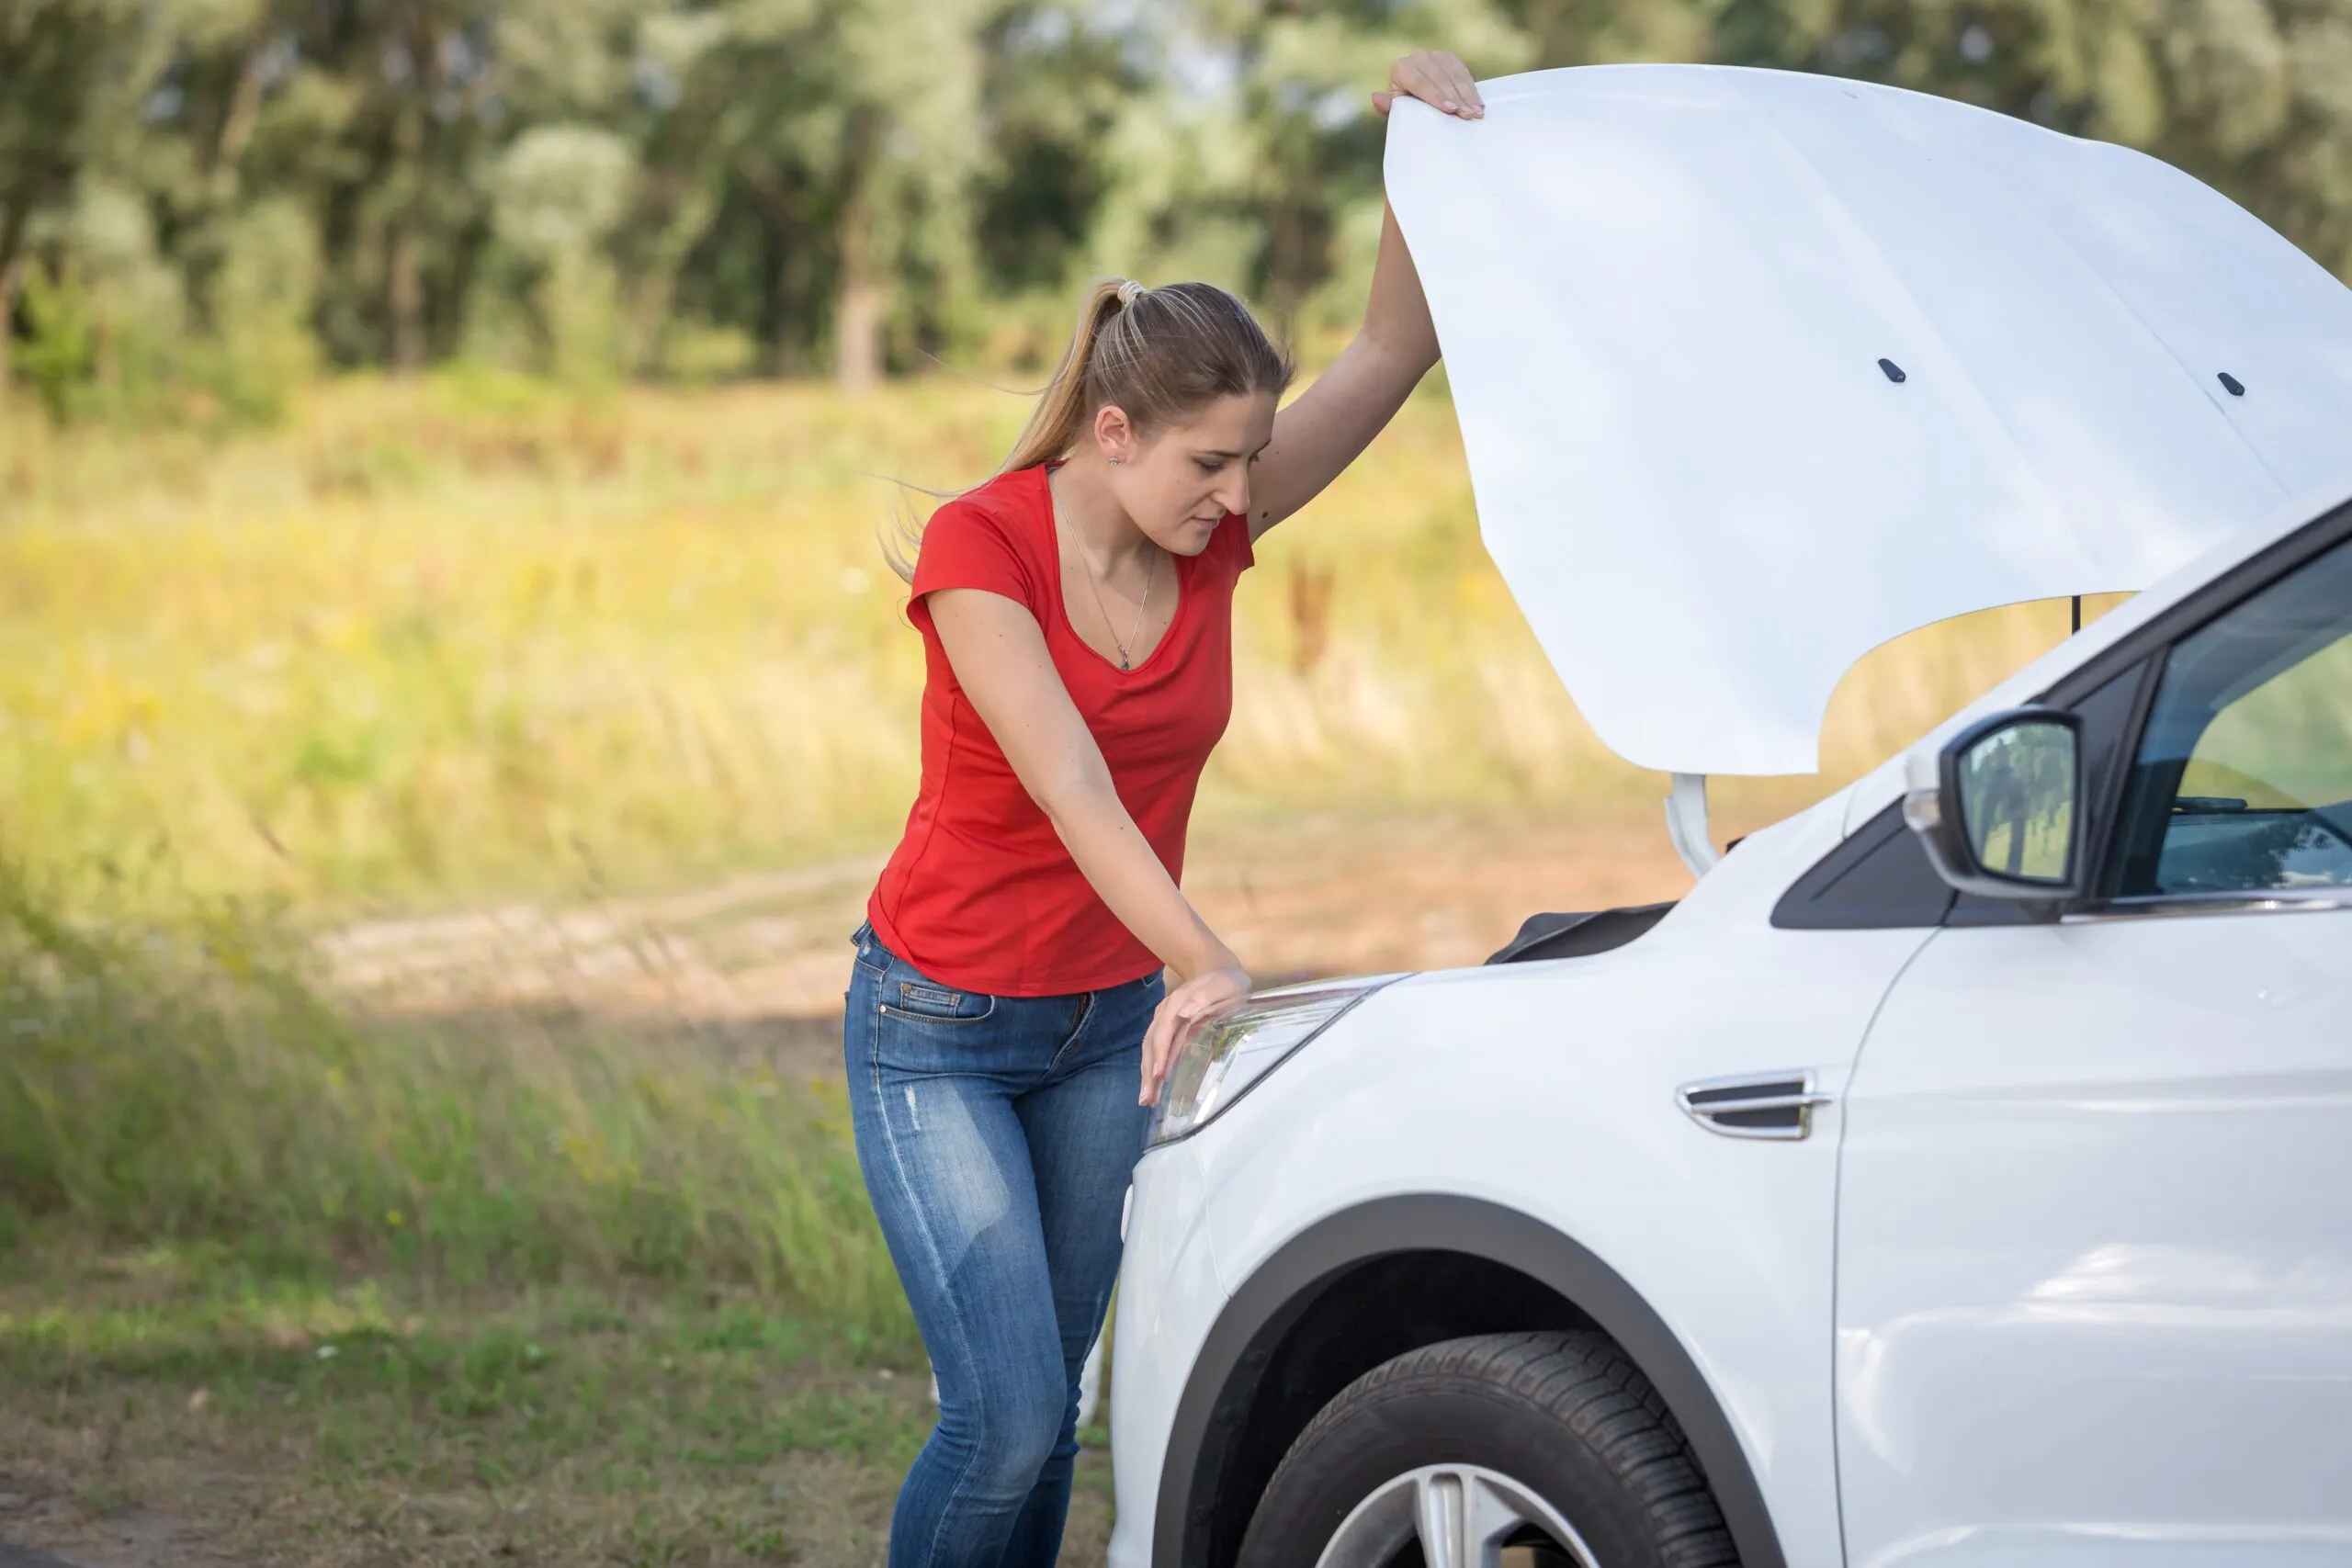 Woman looks at broken car’s engine in field. If your motor vehicle is defective, contact us for the auto product liability defect lawyers in Wyoming that will fight to get you proper compensation.